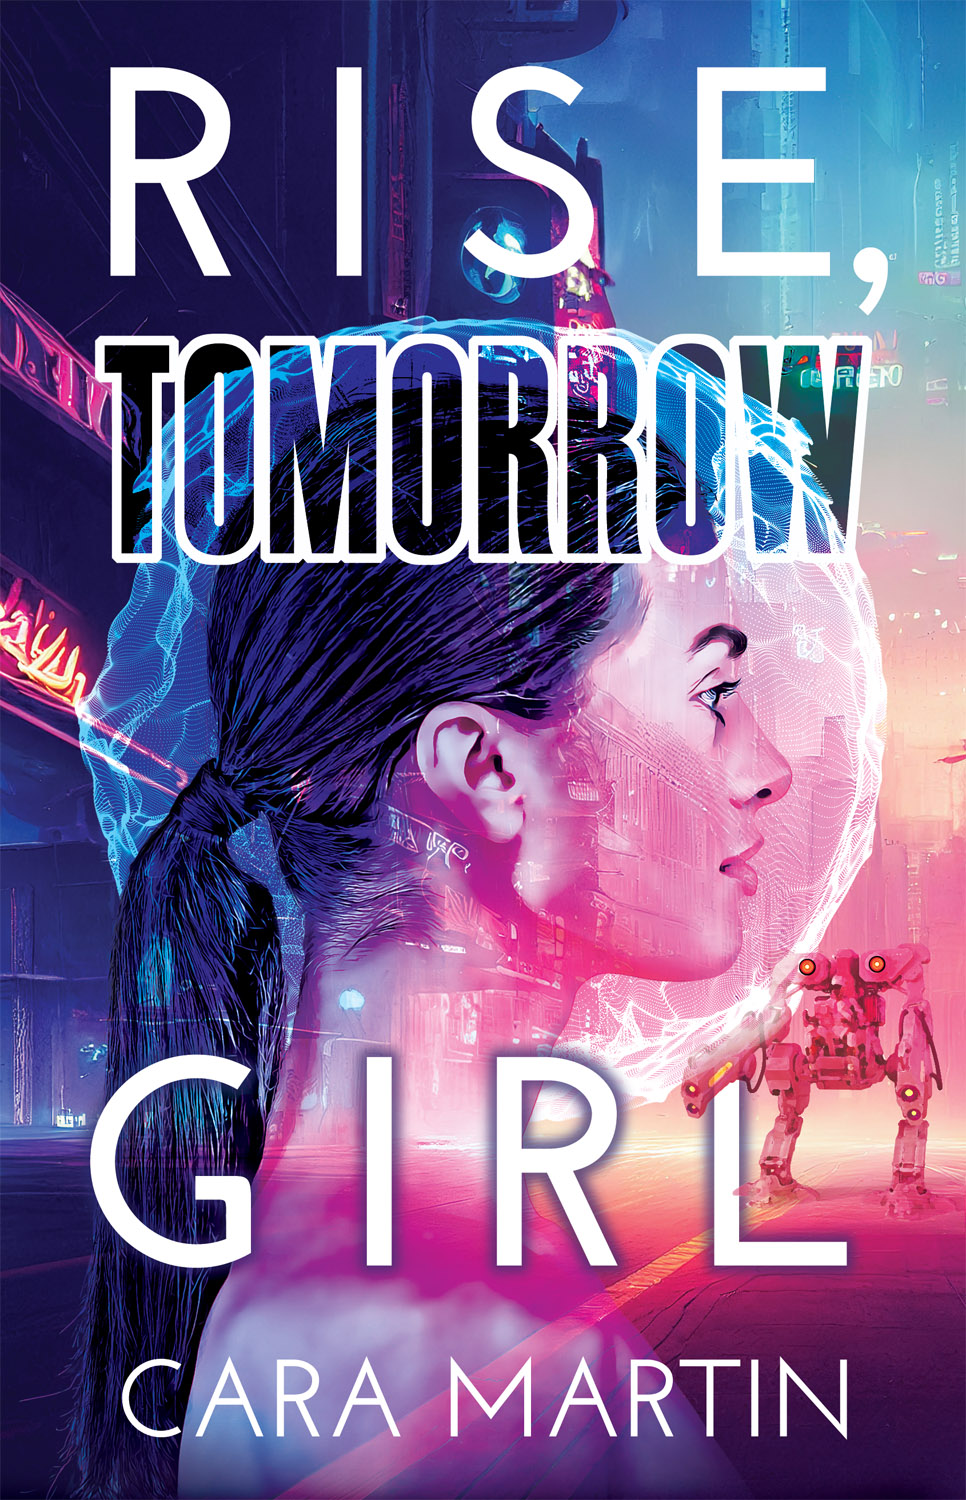 Rise, Tomorrow Girl cover. A girl in profile against a futuristic city. Her head is encased in a portal/orb and a military robot lurks in the background.